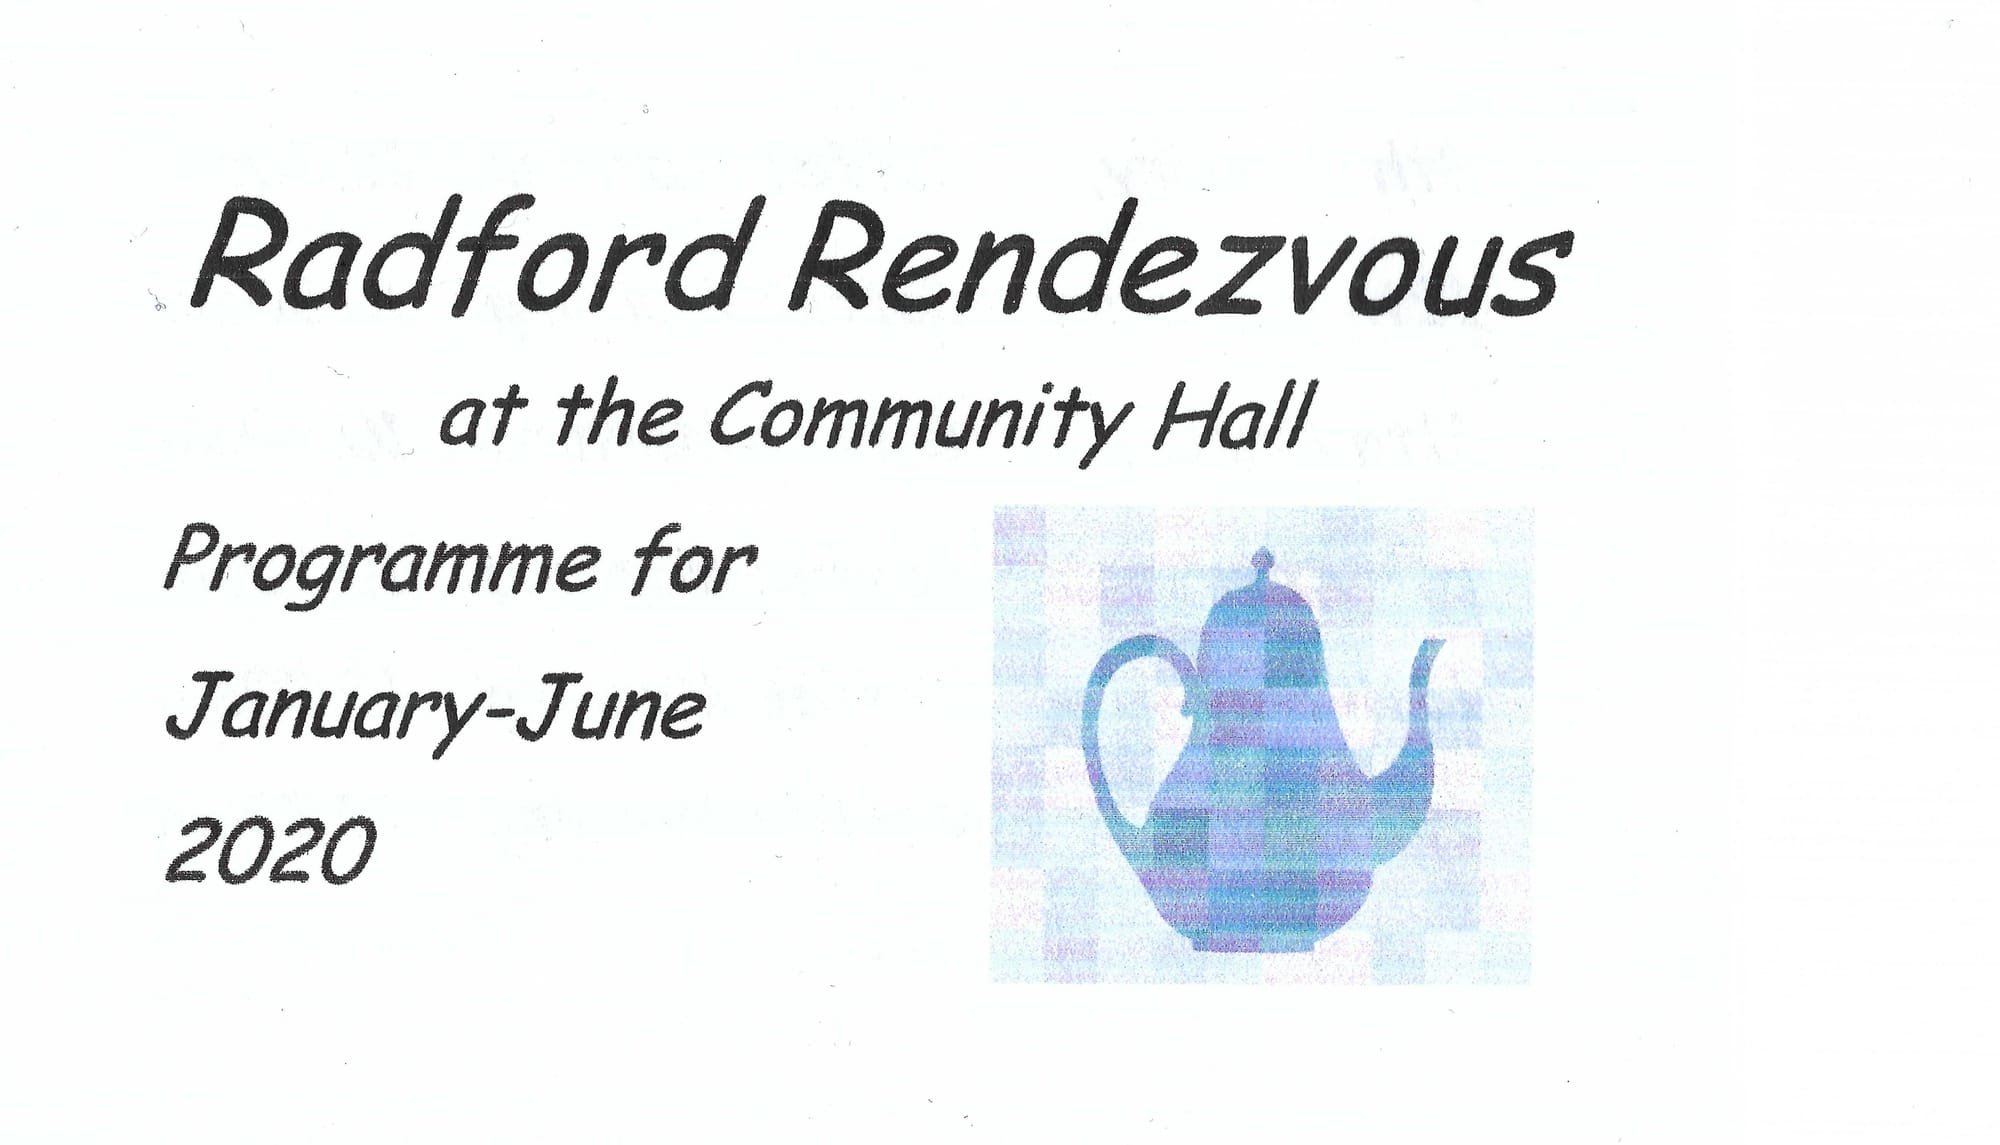 Radford Rendezvous at the Community Hall